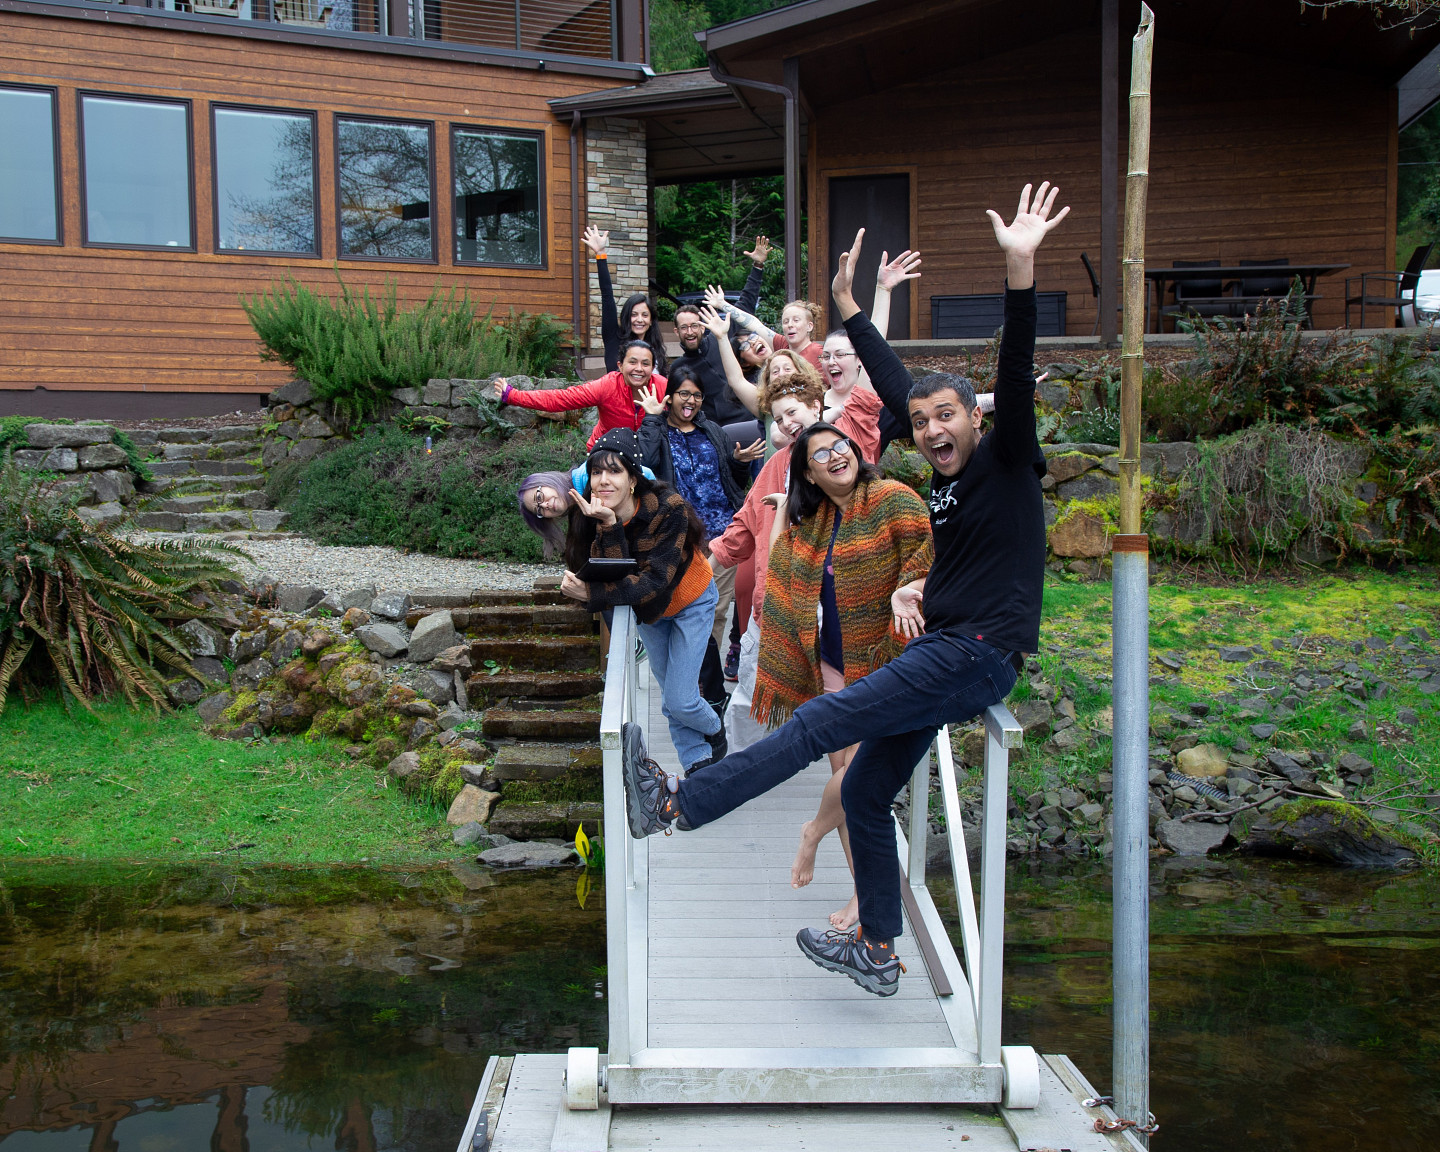 Rehearsals for Life students on their retreat, jumping into the air with smiles